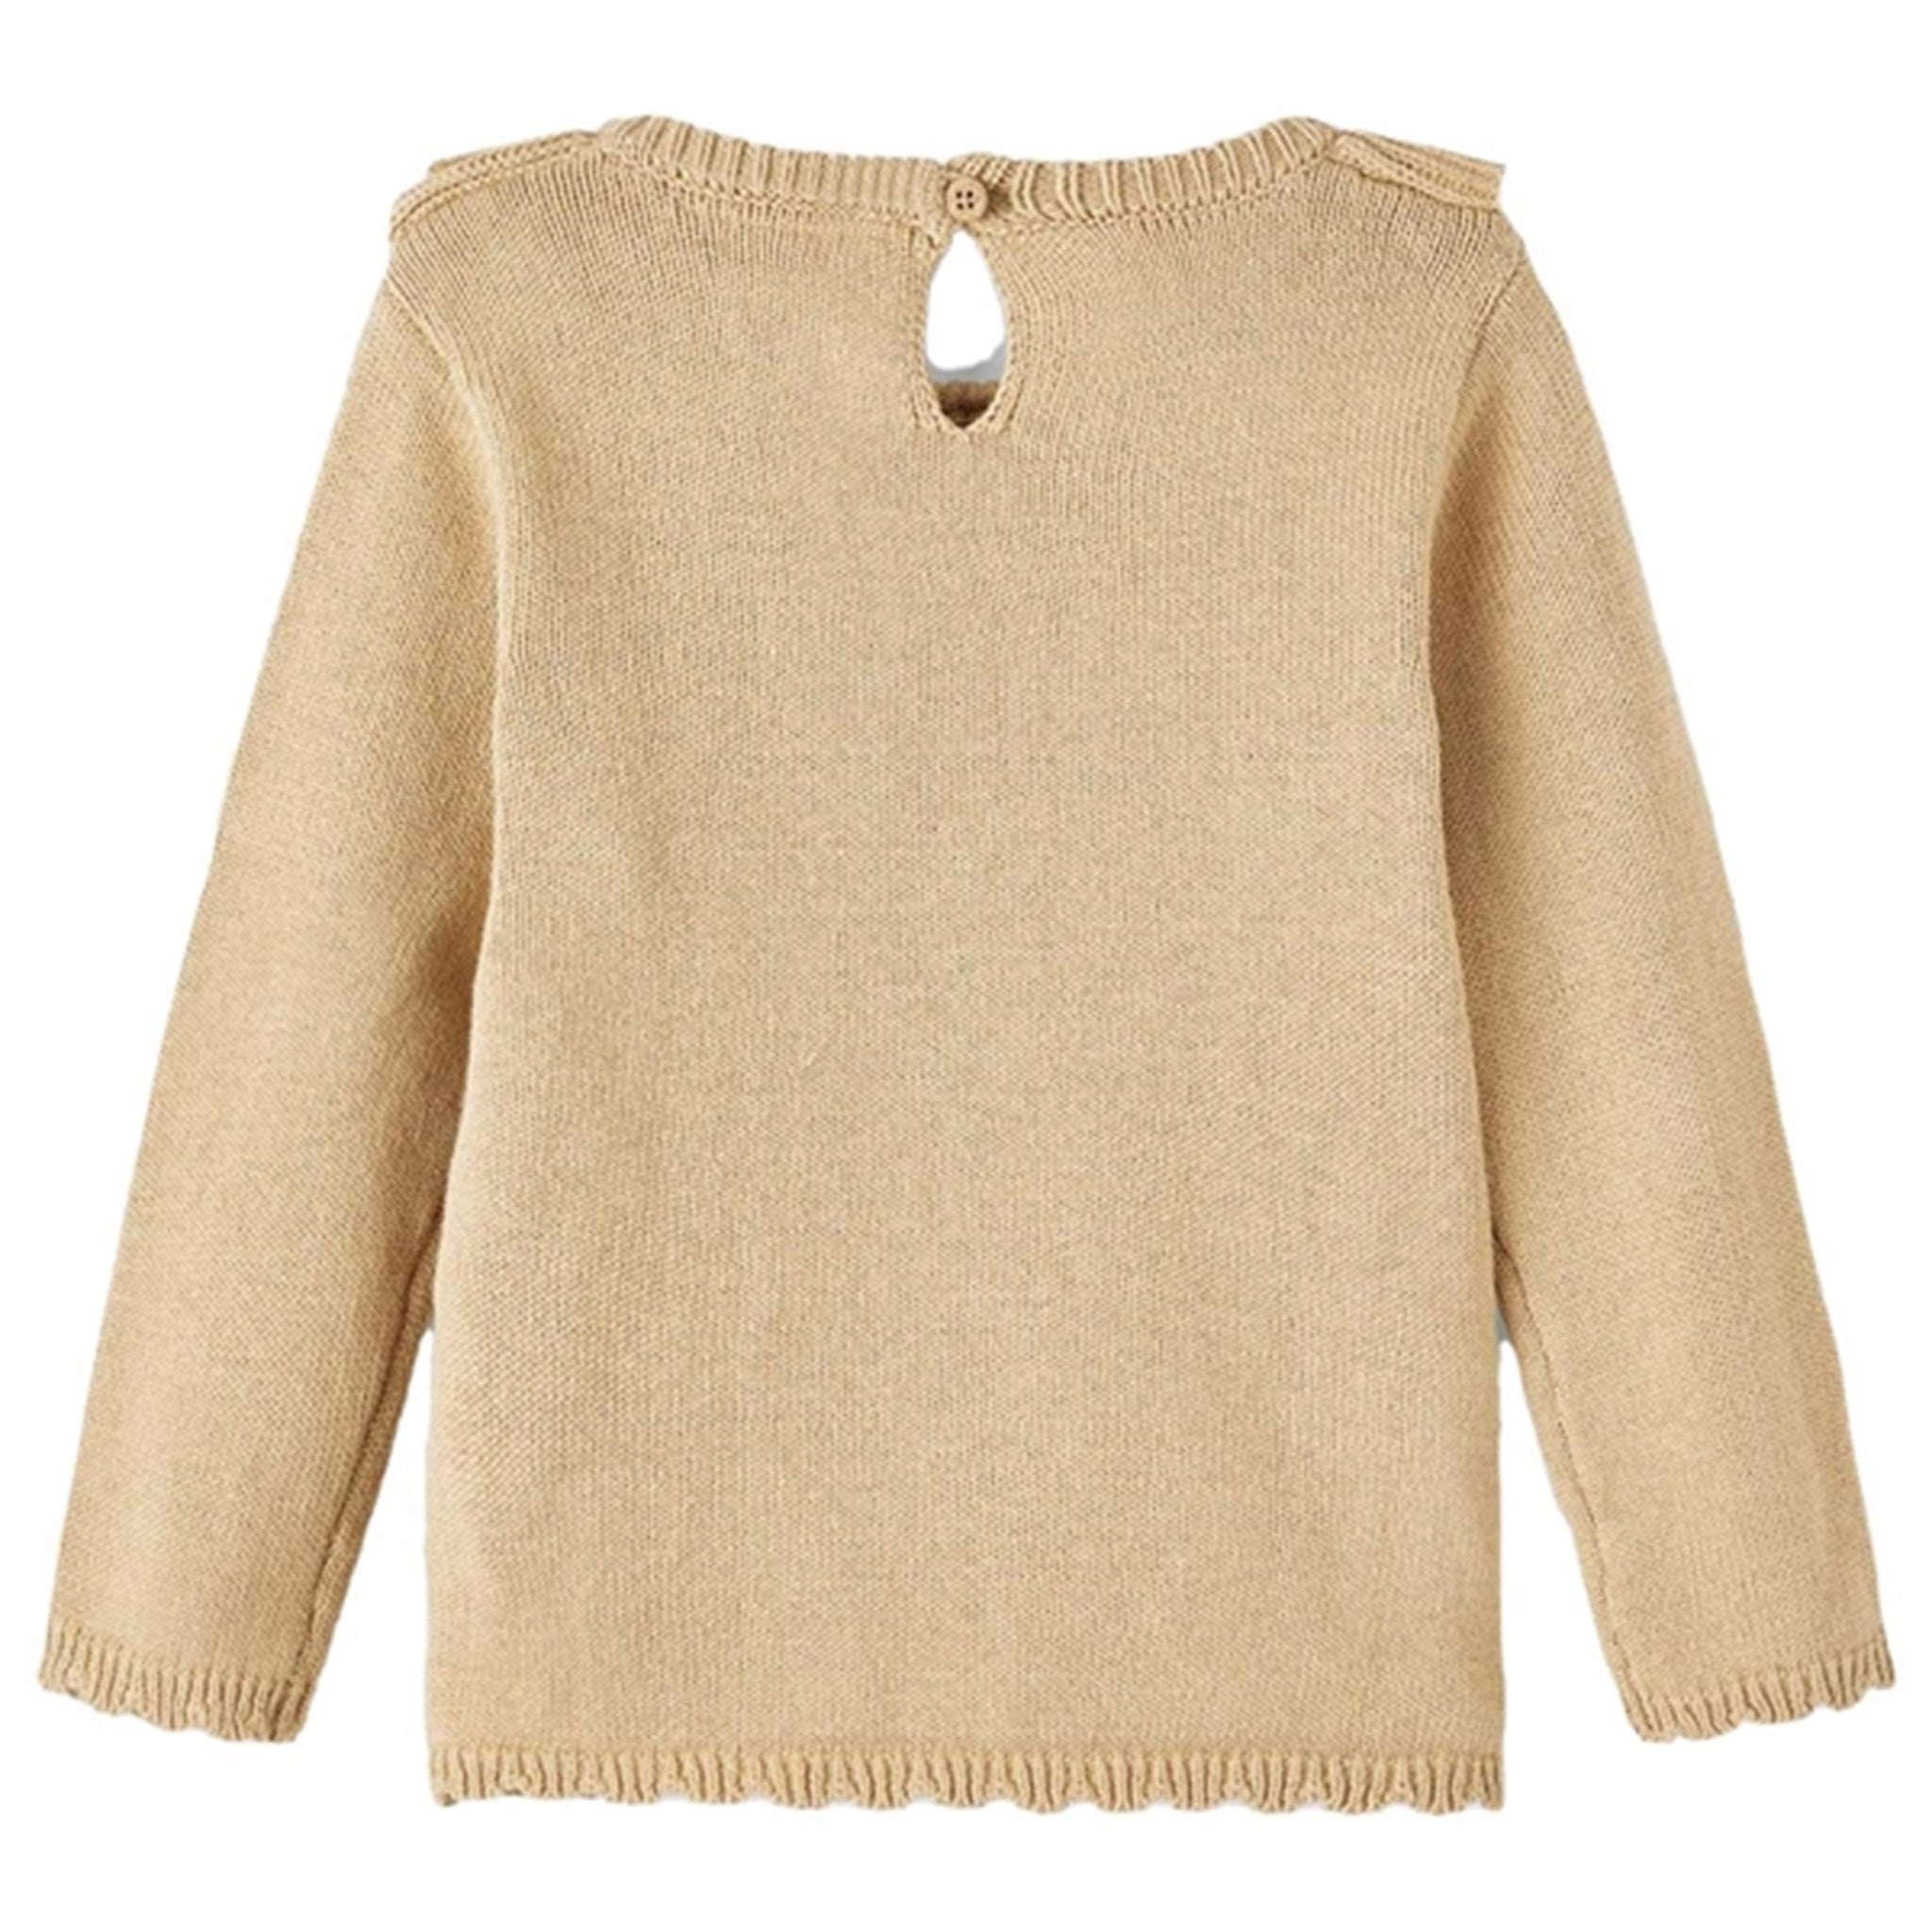 Lil' Atelier Curds & Whey Laguno Knit 3